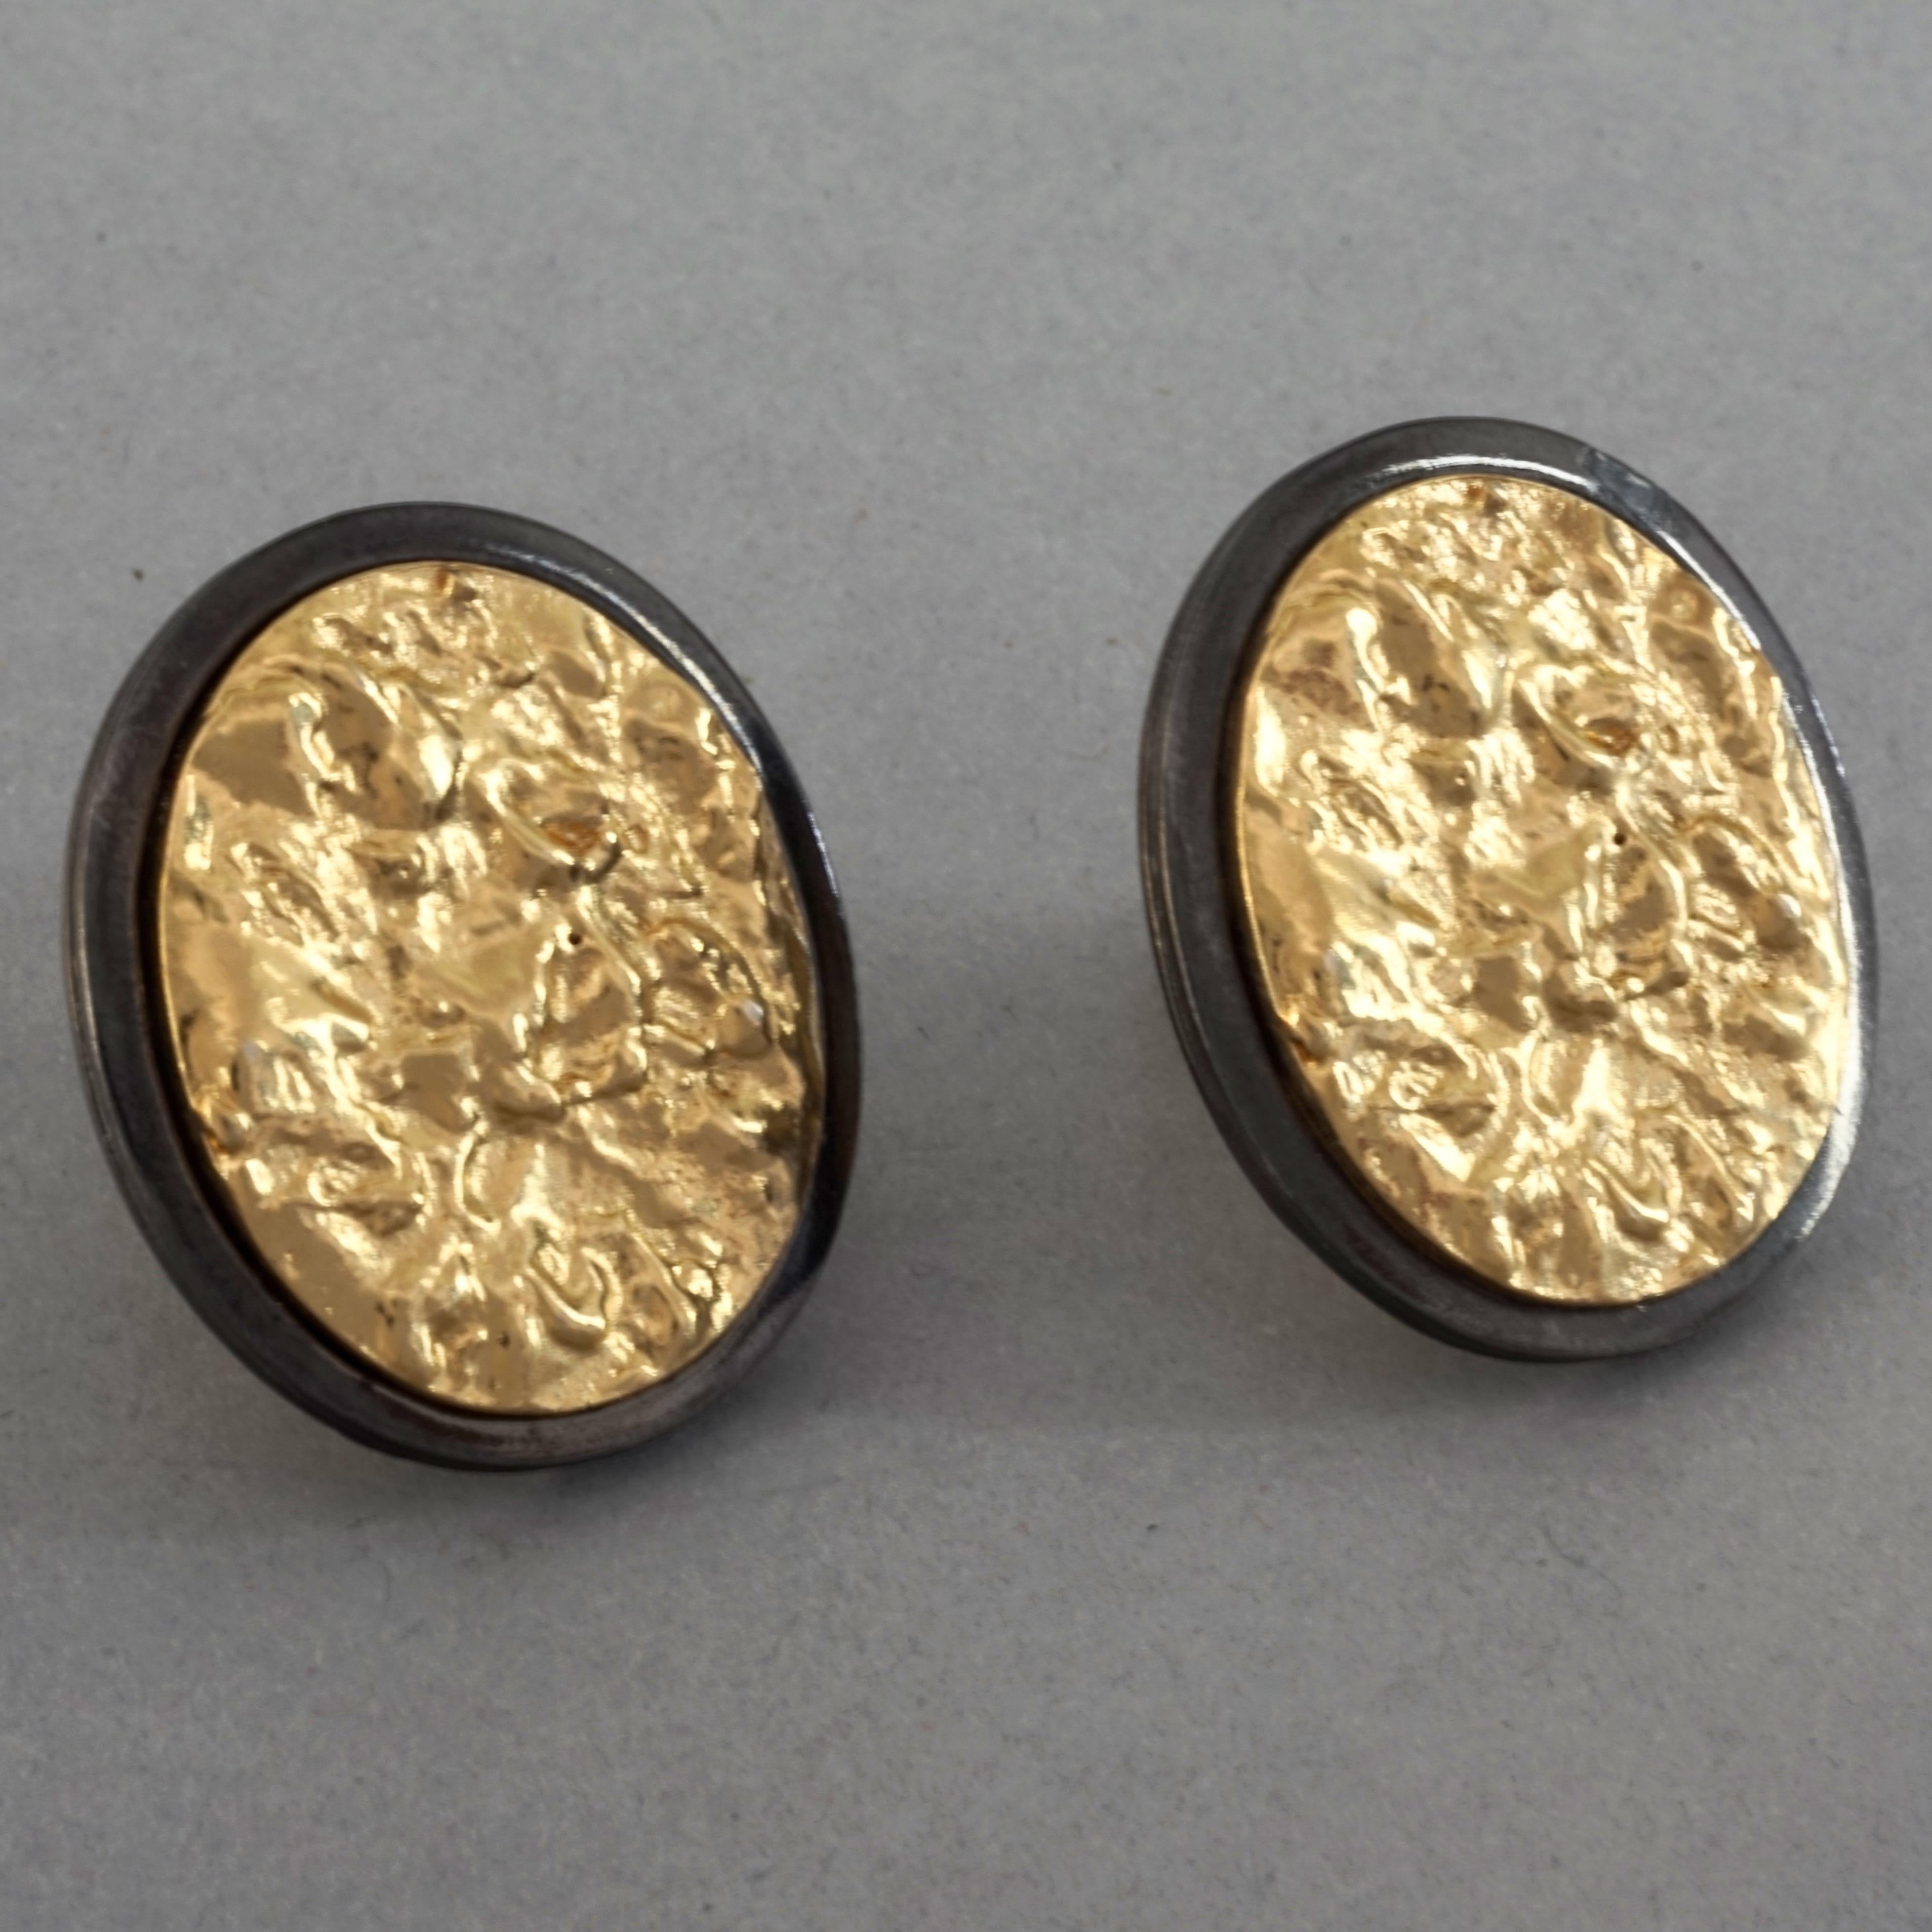 Vintage YVES SAINT LAURENT Ysl Two Tone Textured Oval Disc Earrings For Sale 3